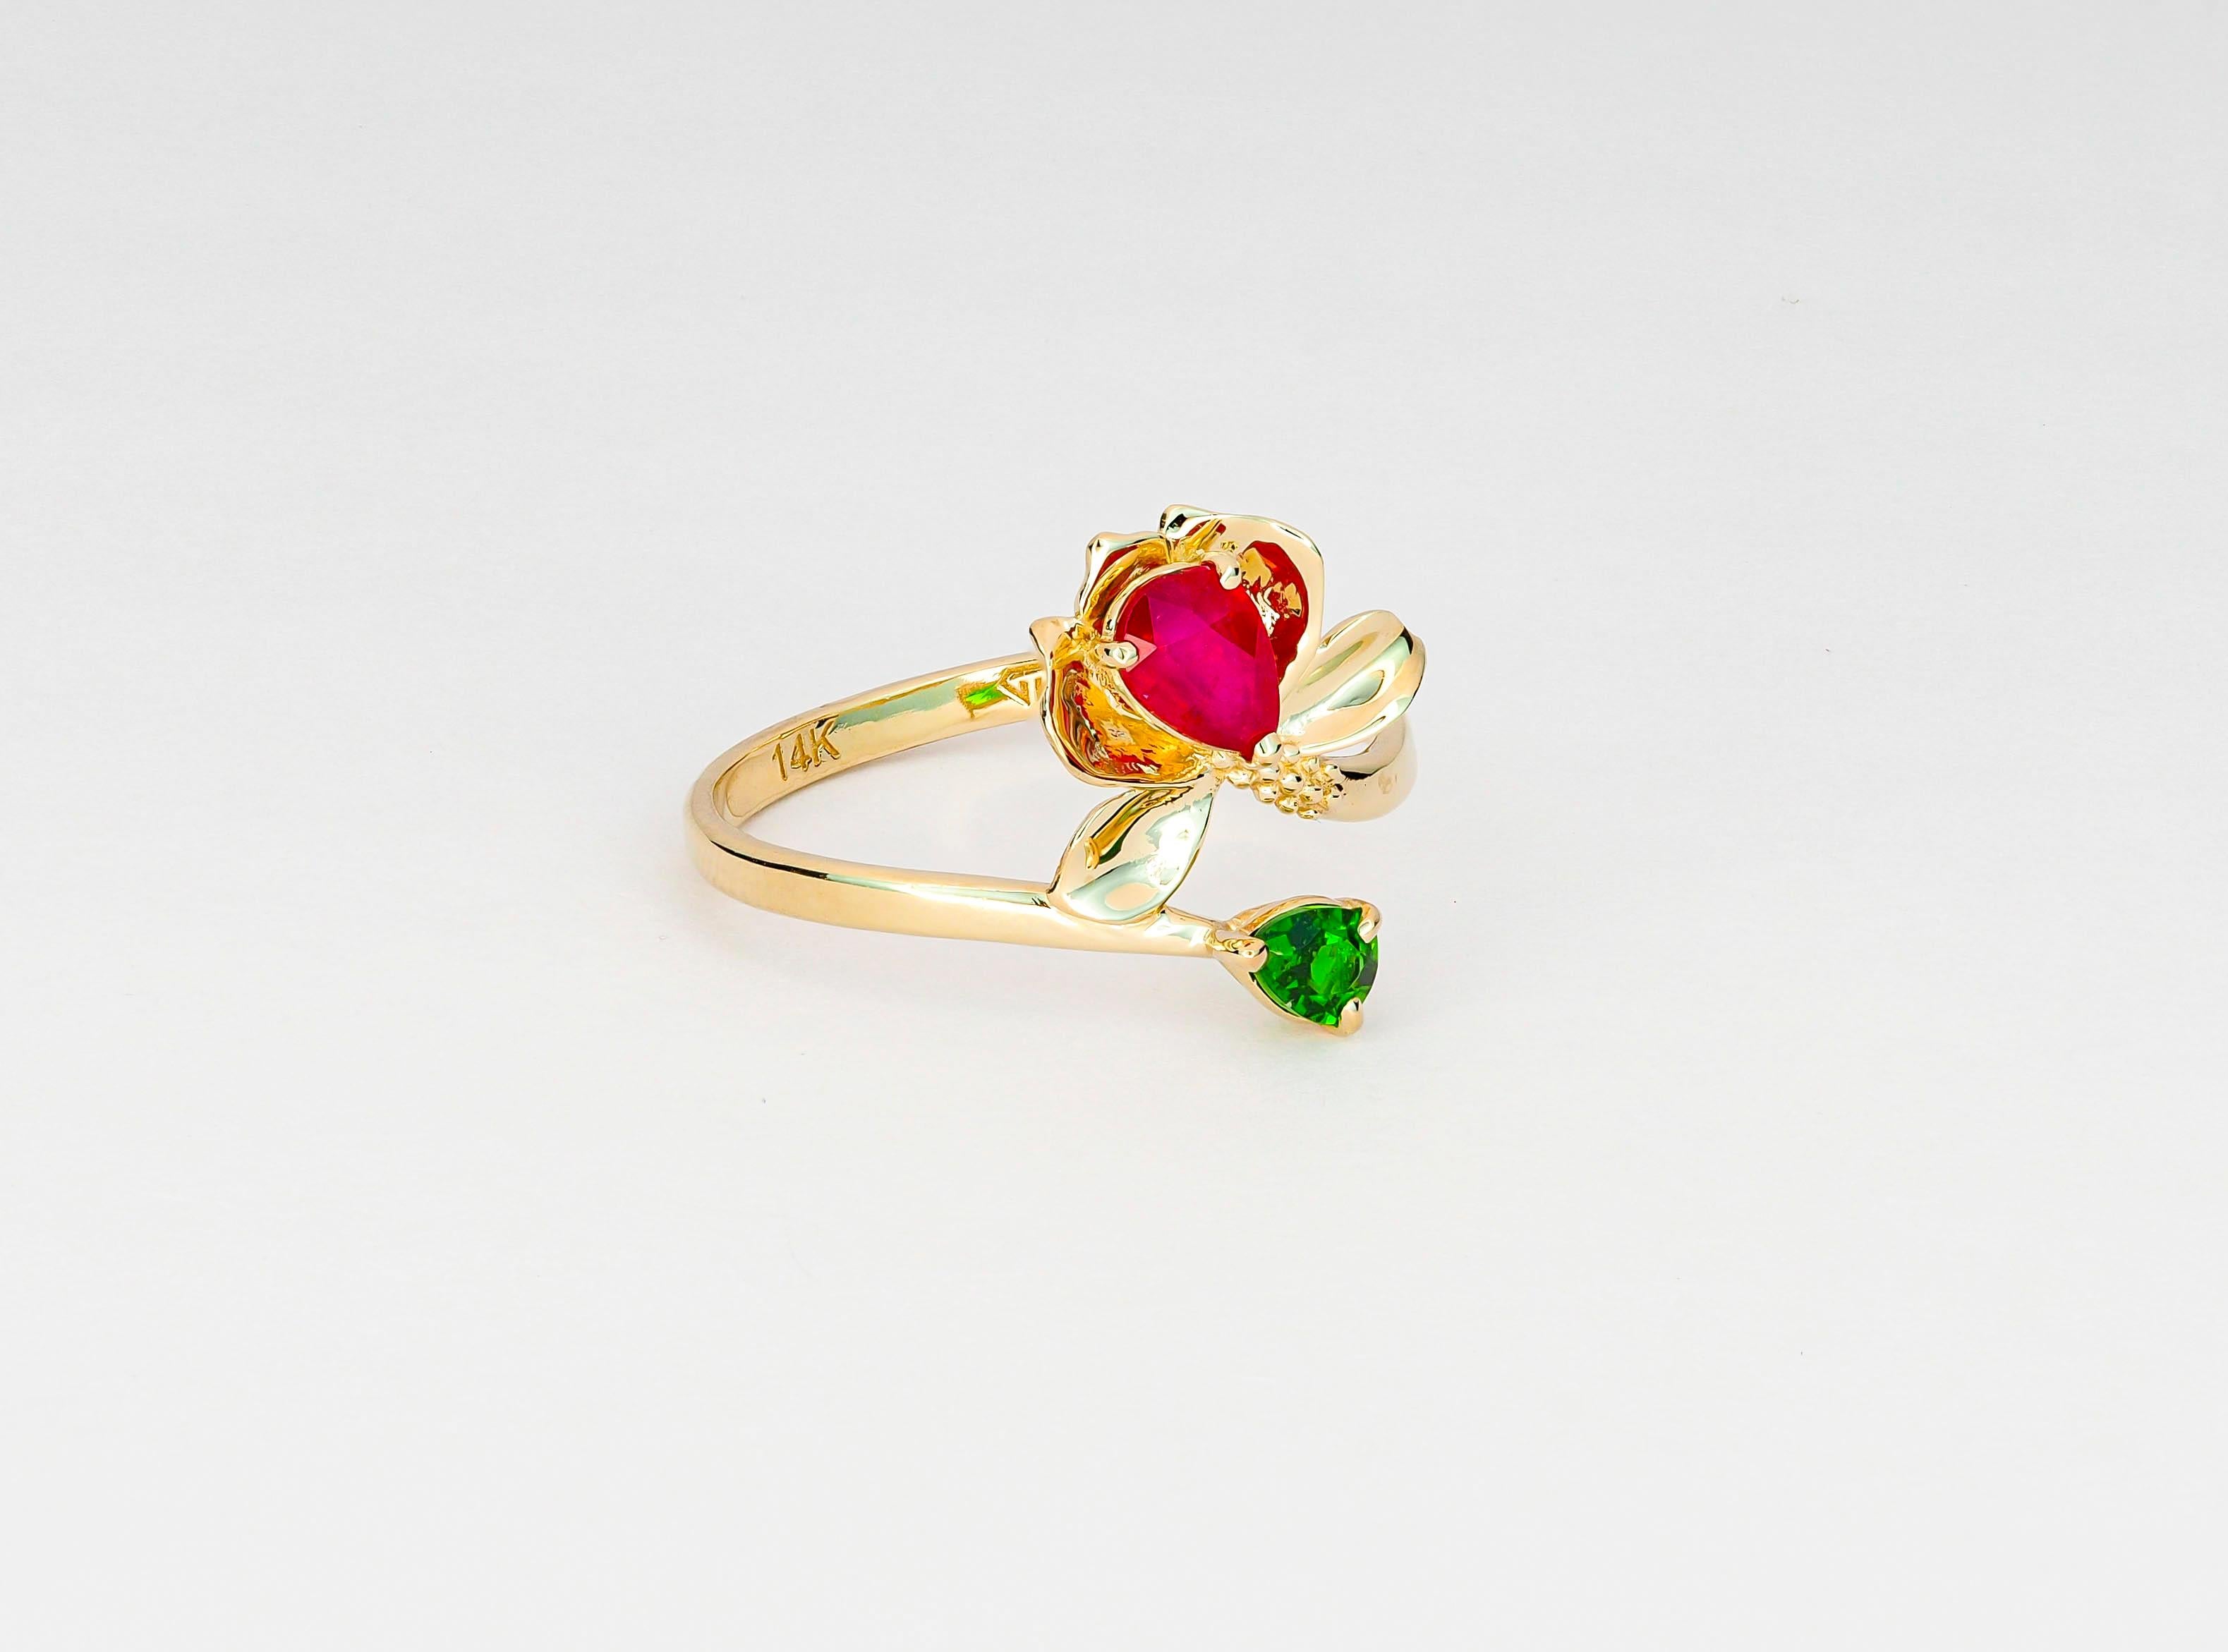 For Sale:  14 K Gold Ring with Ruby and Chrome Diopside. Water Lily Flower Gold Ring! 5